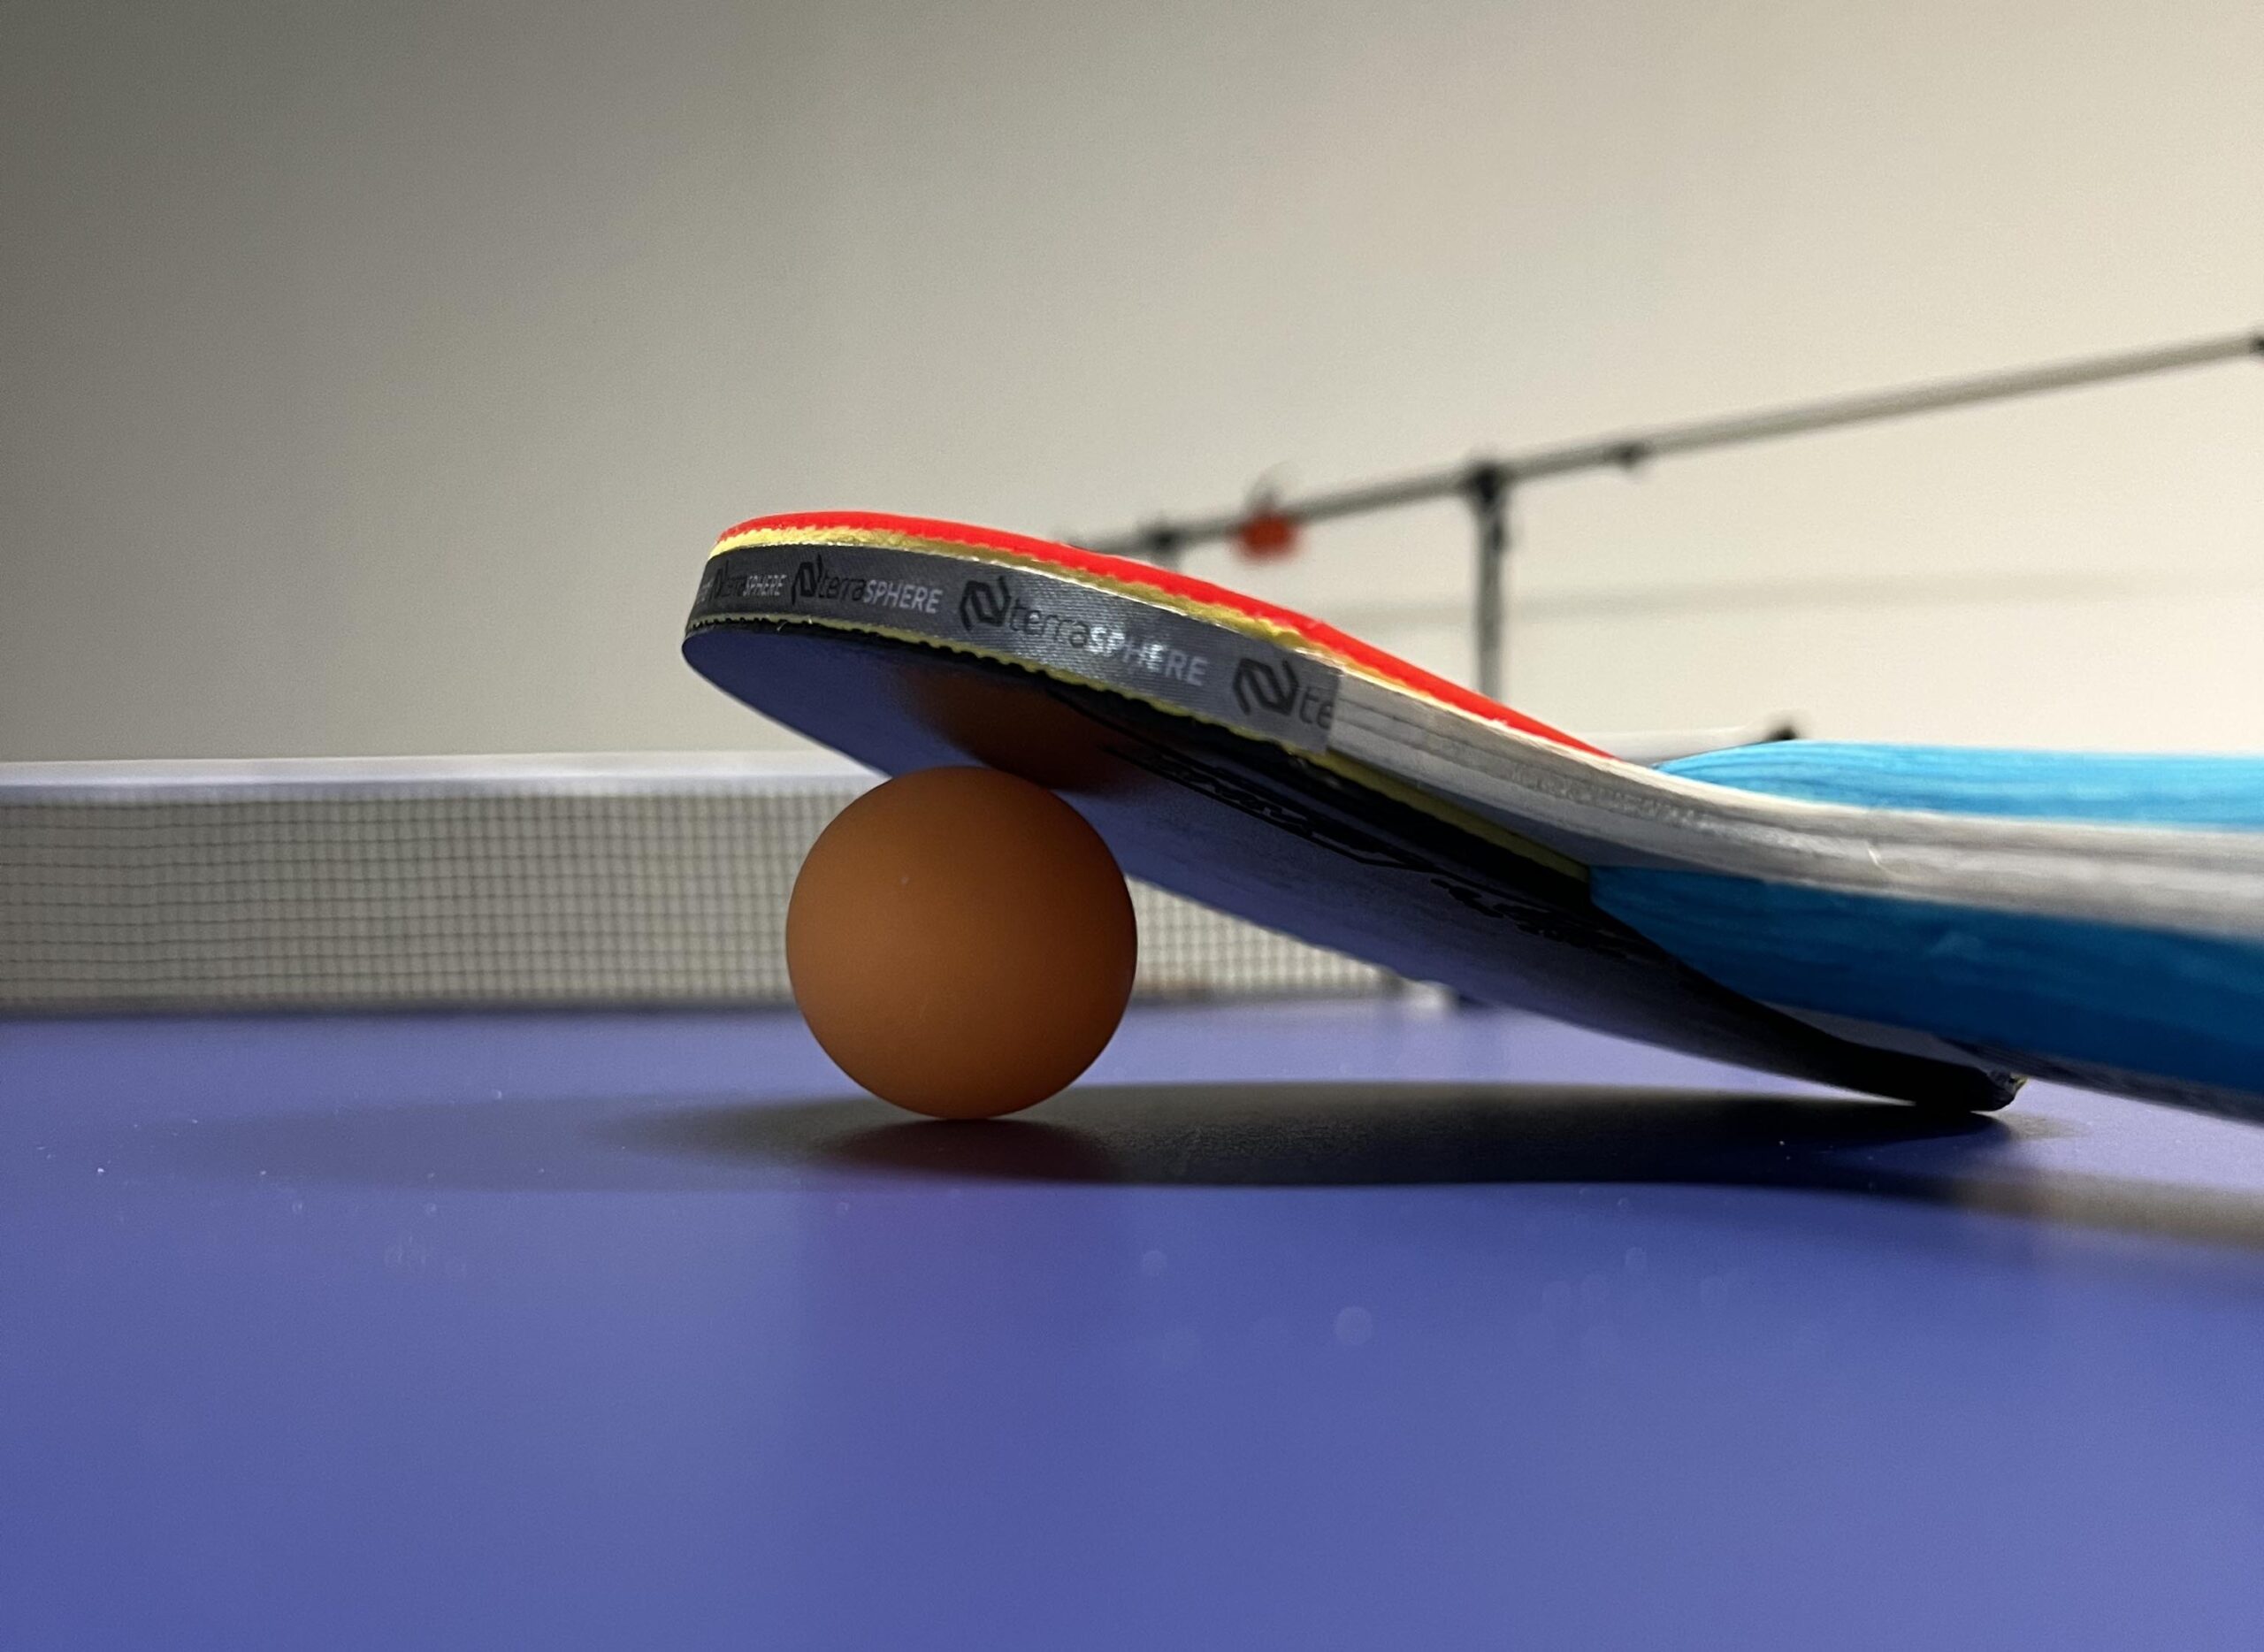 A Ping Pong Bat Rests On A Ping Pong Ball Sitting On A Ping Pong Table